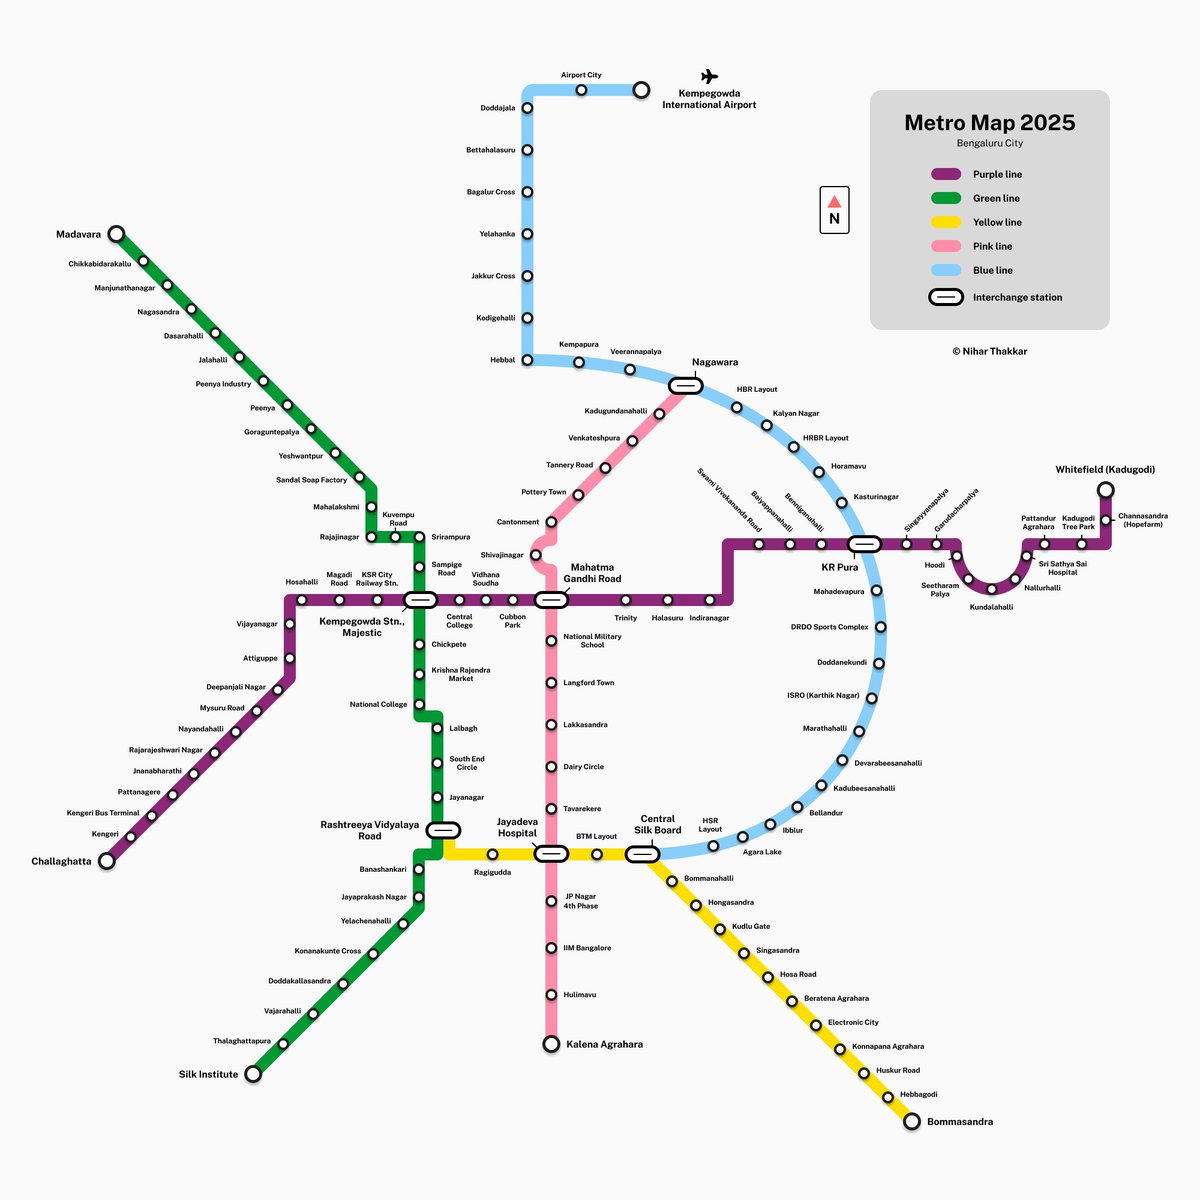 Designed my first transit map! 'Metro Map 2025' - a schematic representation of #NammaMetro's under-construction network. Comments?